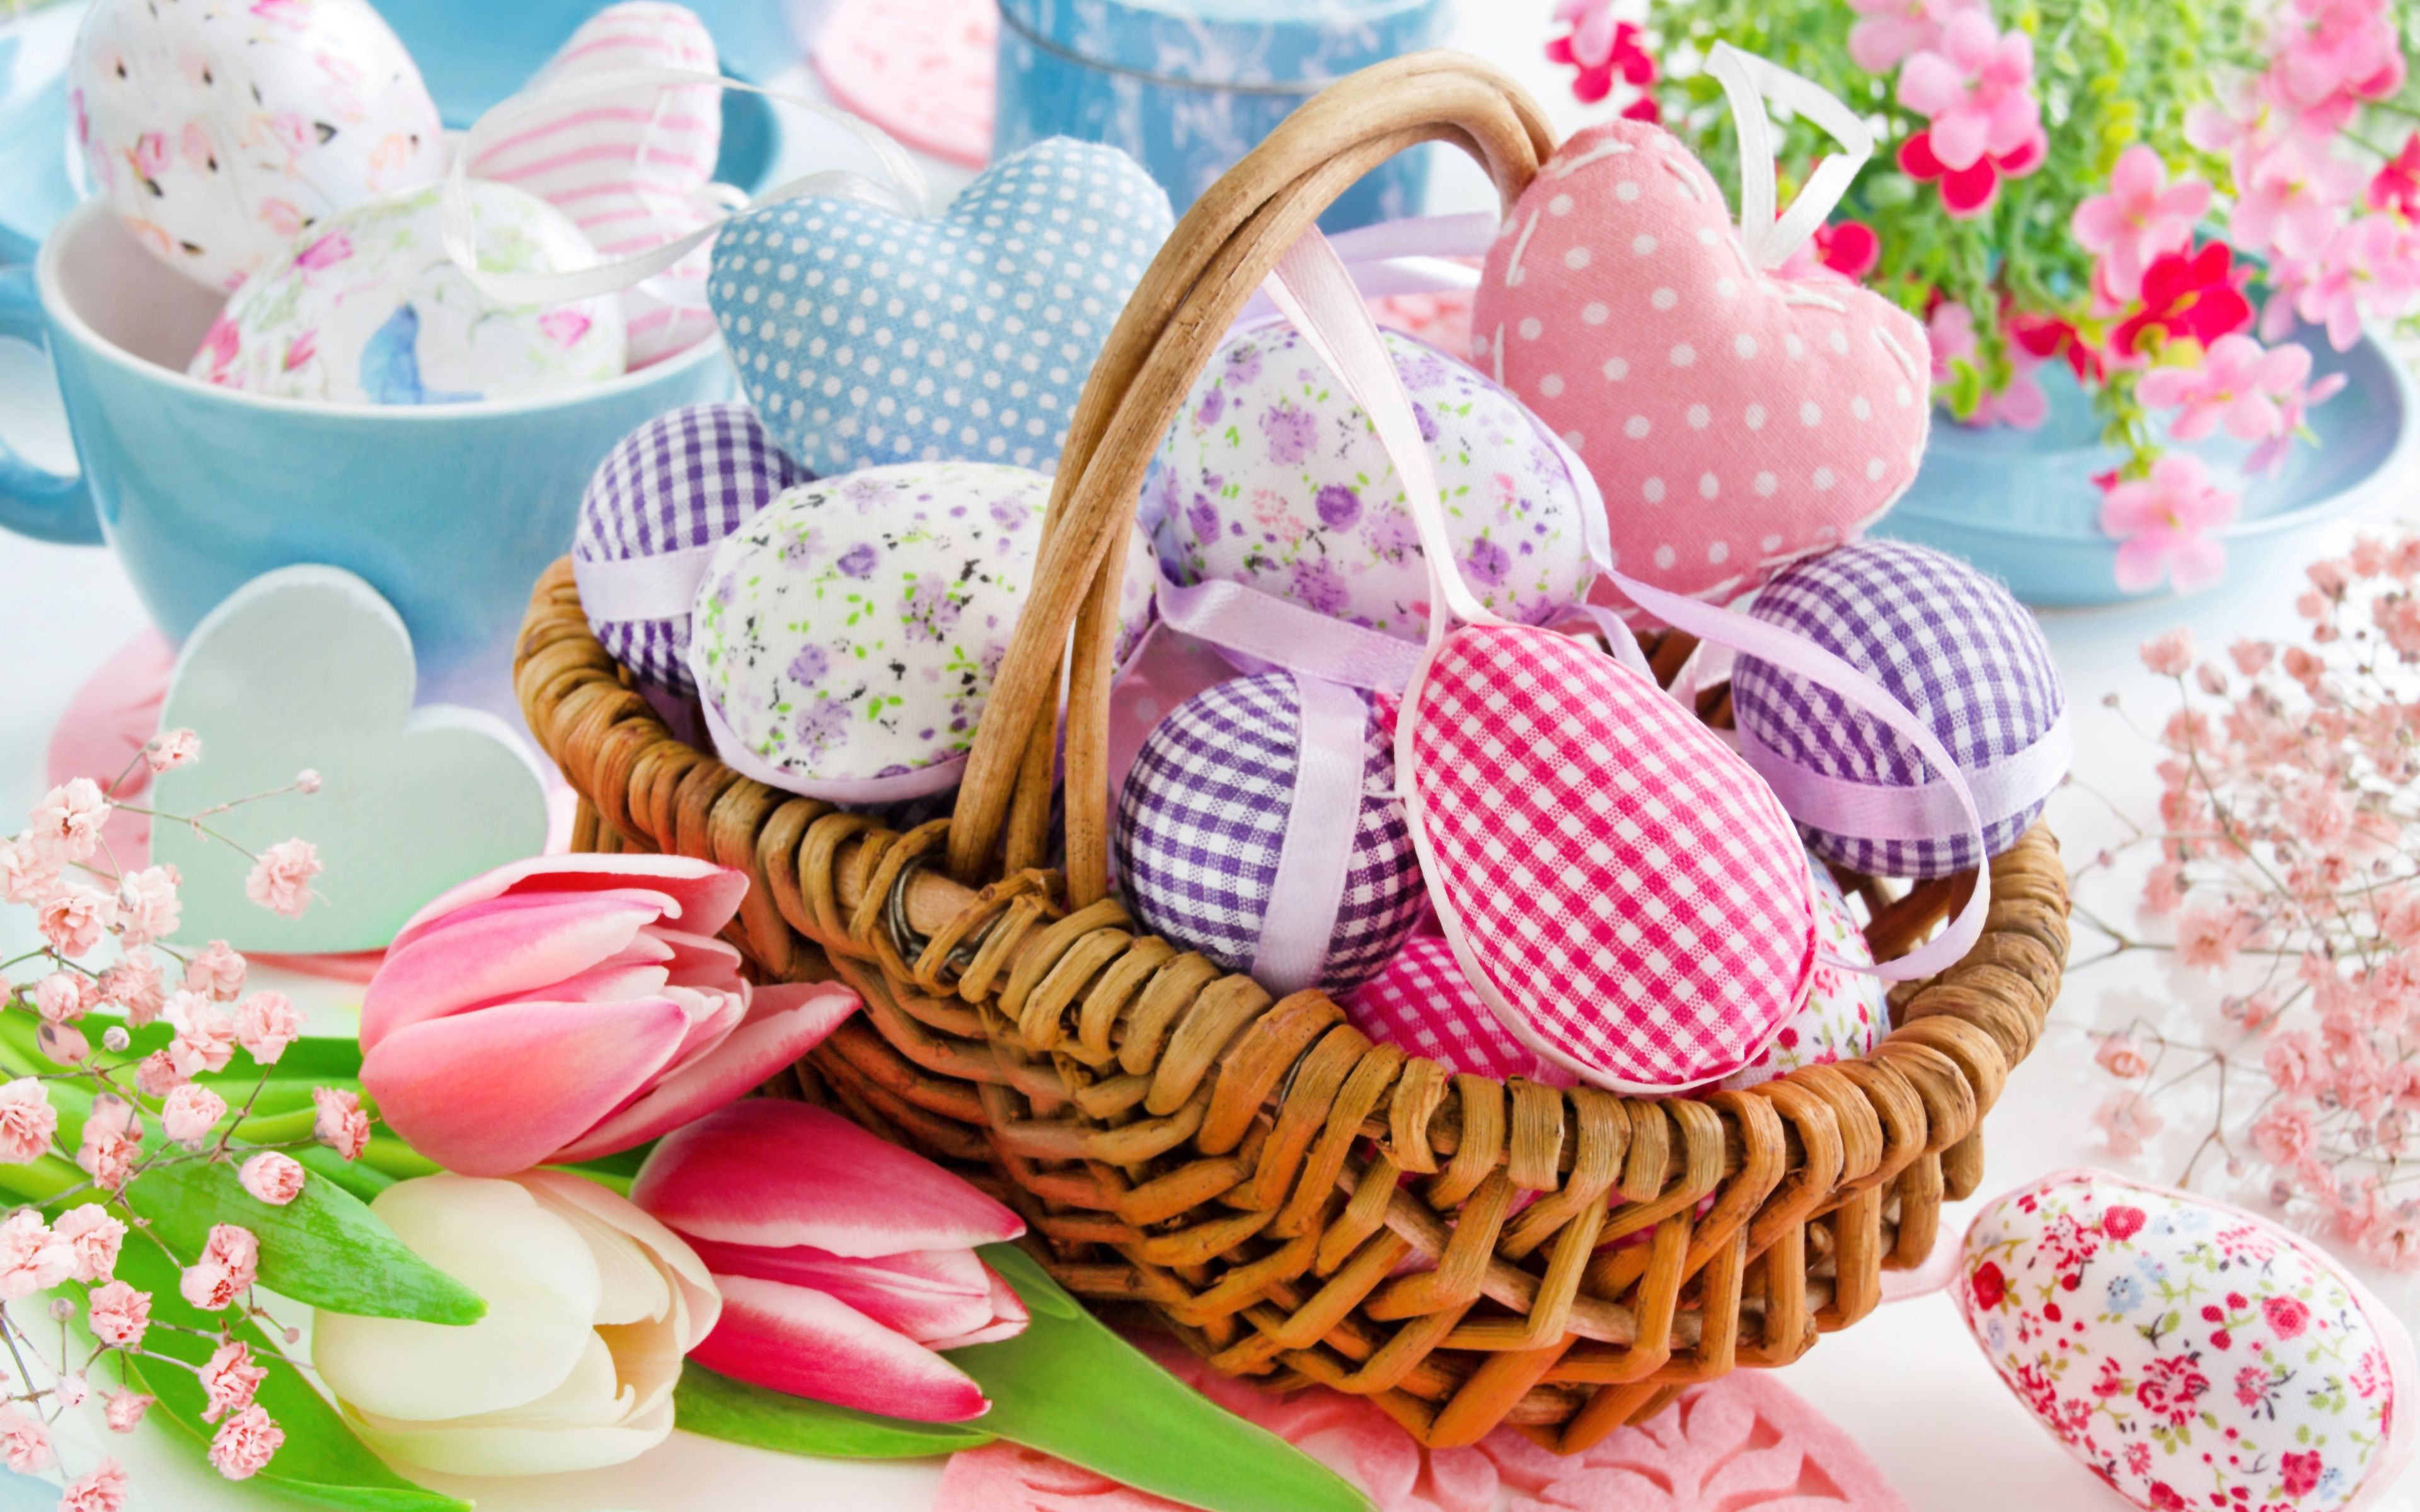 Download wallpaper 4k, Easter basket, Happy Easter, easter eggs, easter decoration, Easter for desktop with resolution 3840x2400. High Quality HD picture wallpaper